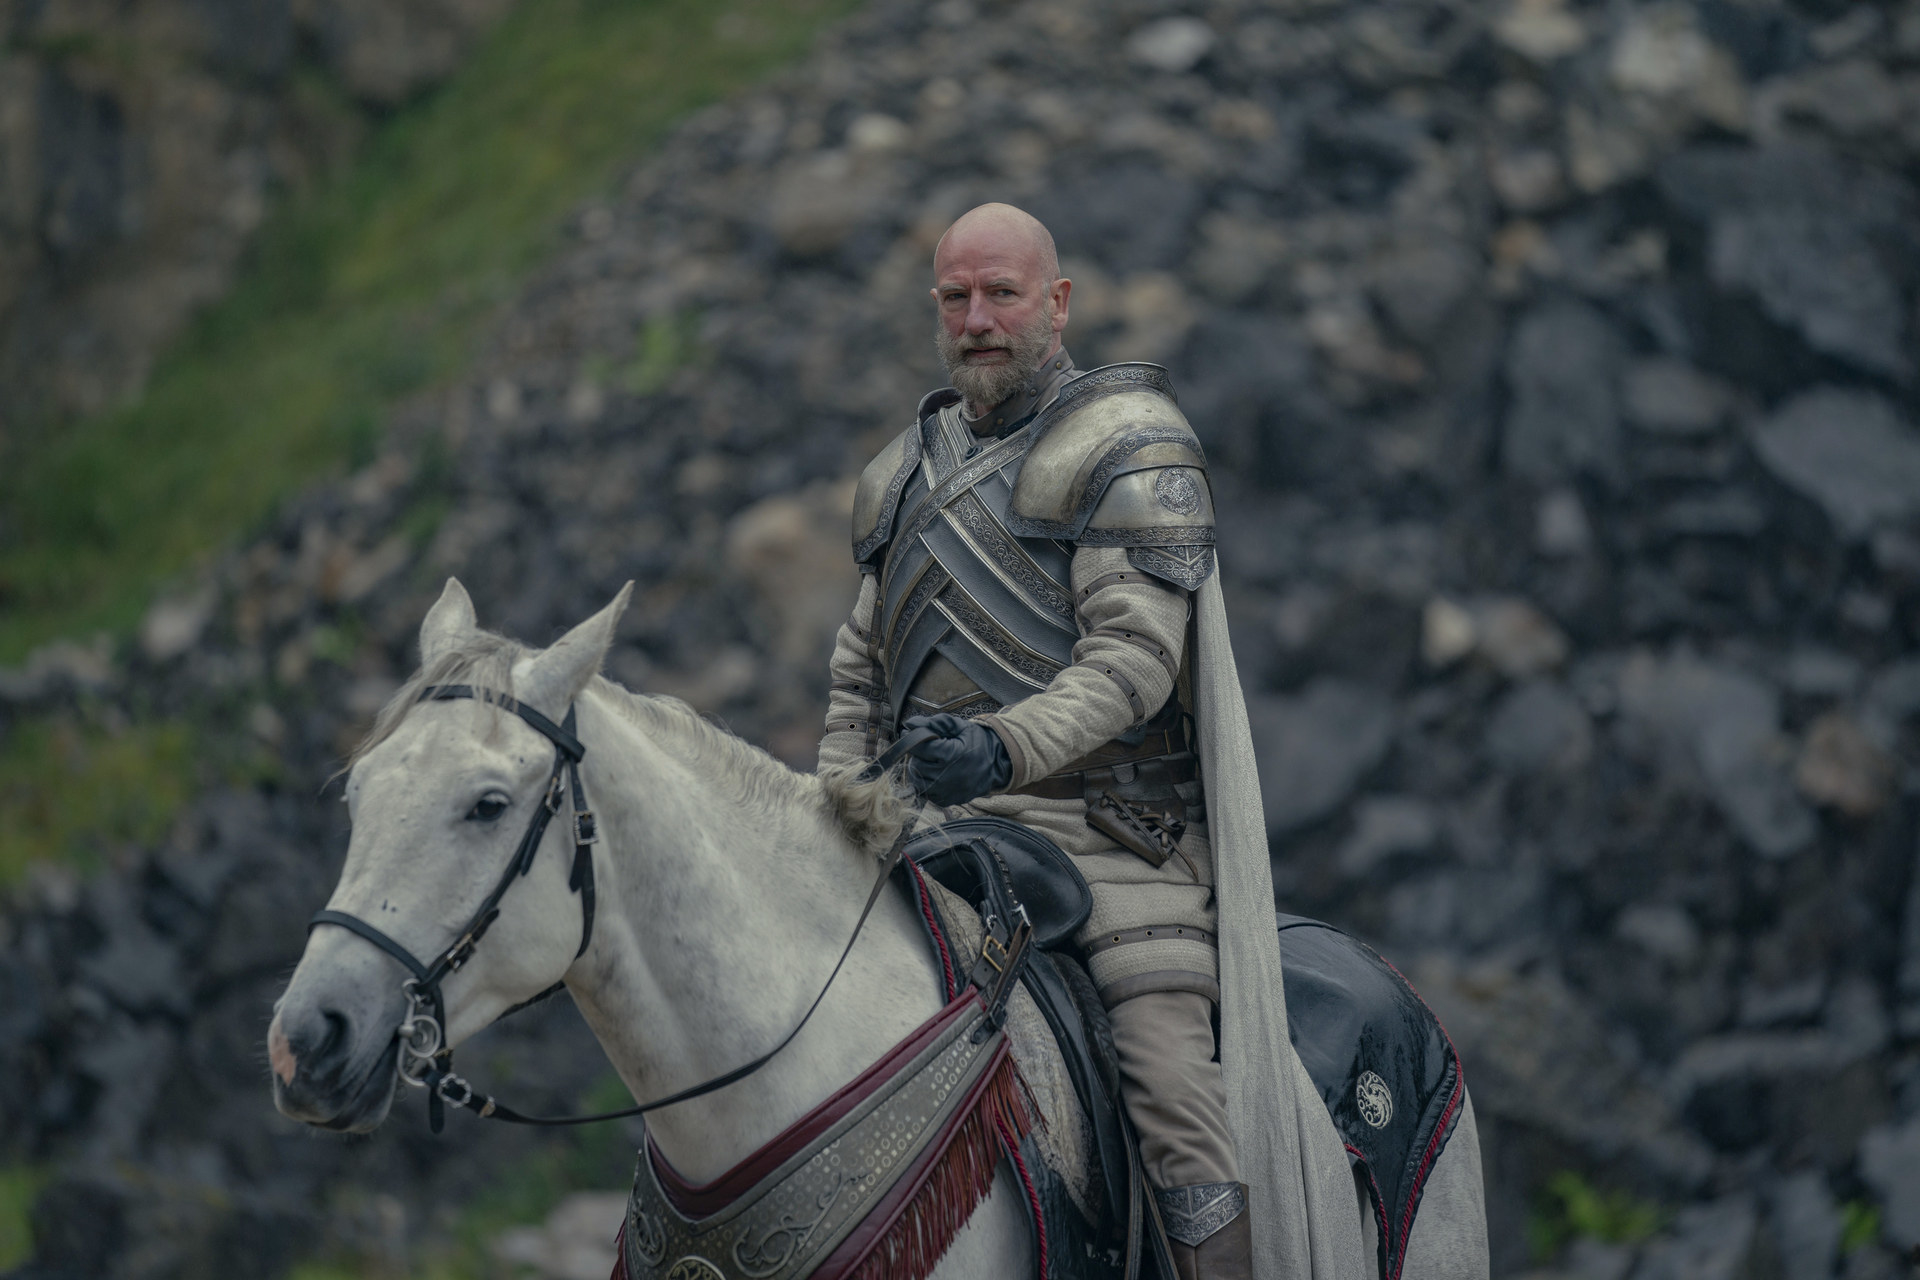 Harrold Westerling wears armor and sits on a white horse